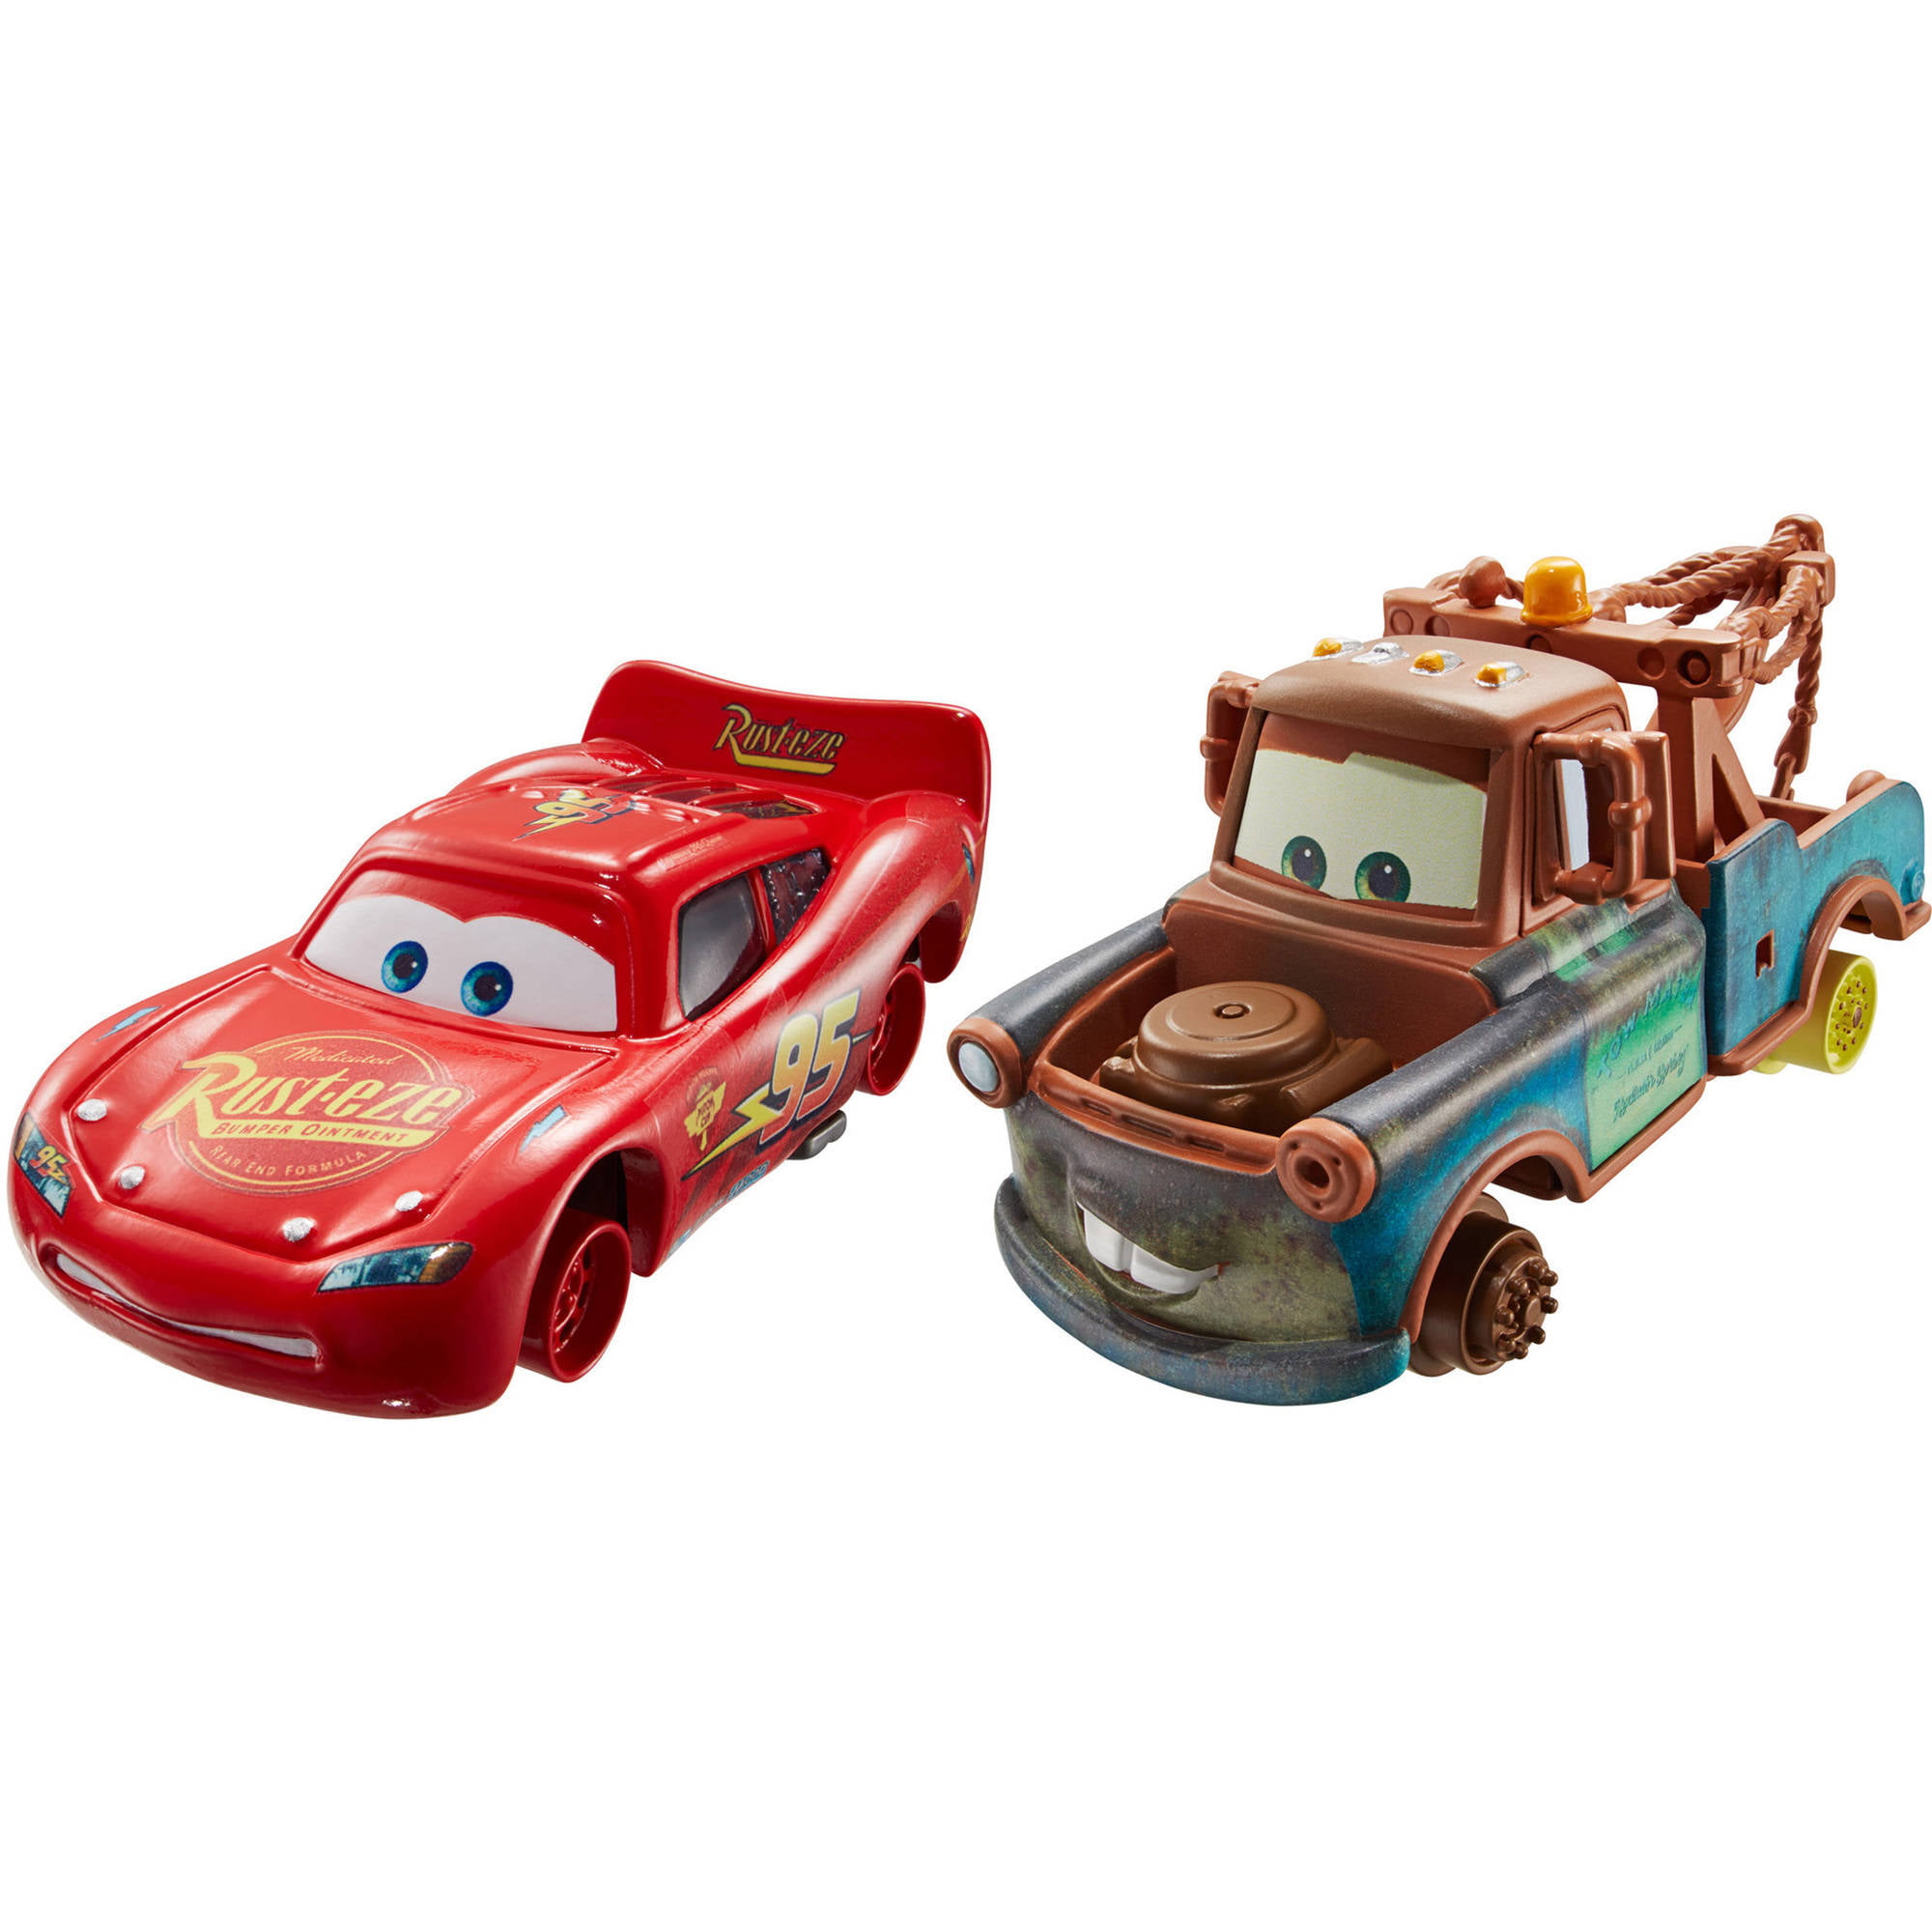 Disney/Pixar Cars Mater & Lightning Mcqueen With No Tires 2-Pack -  